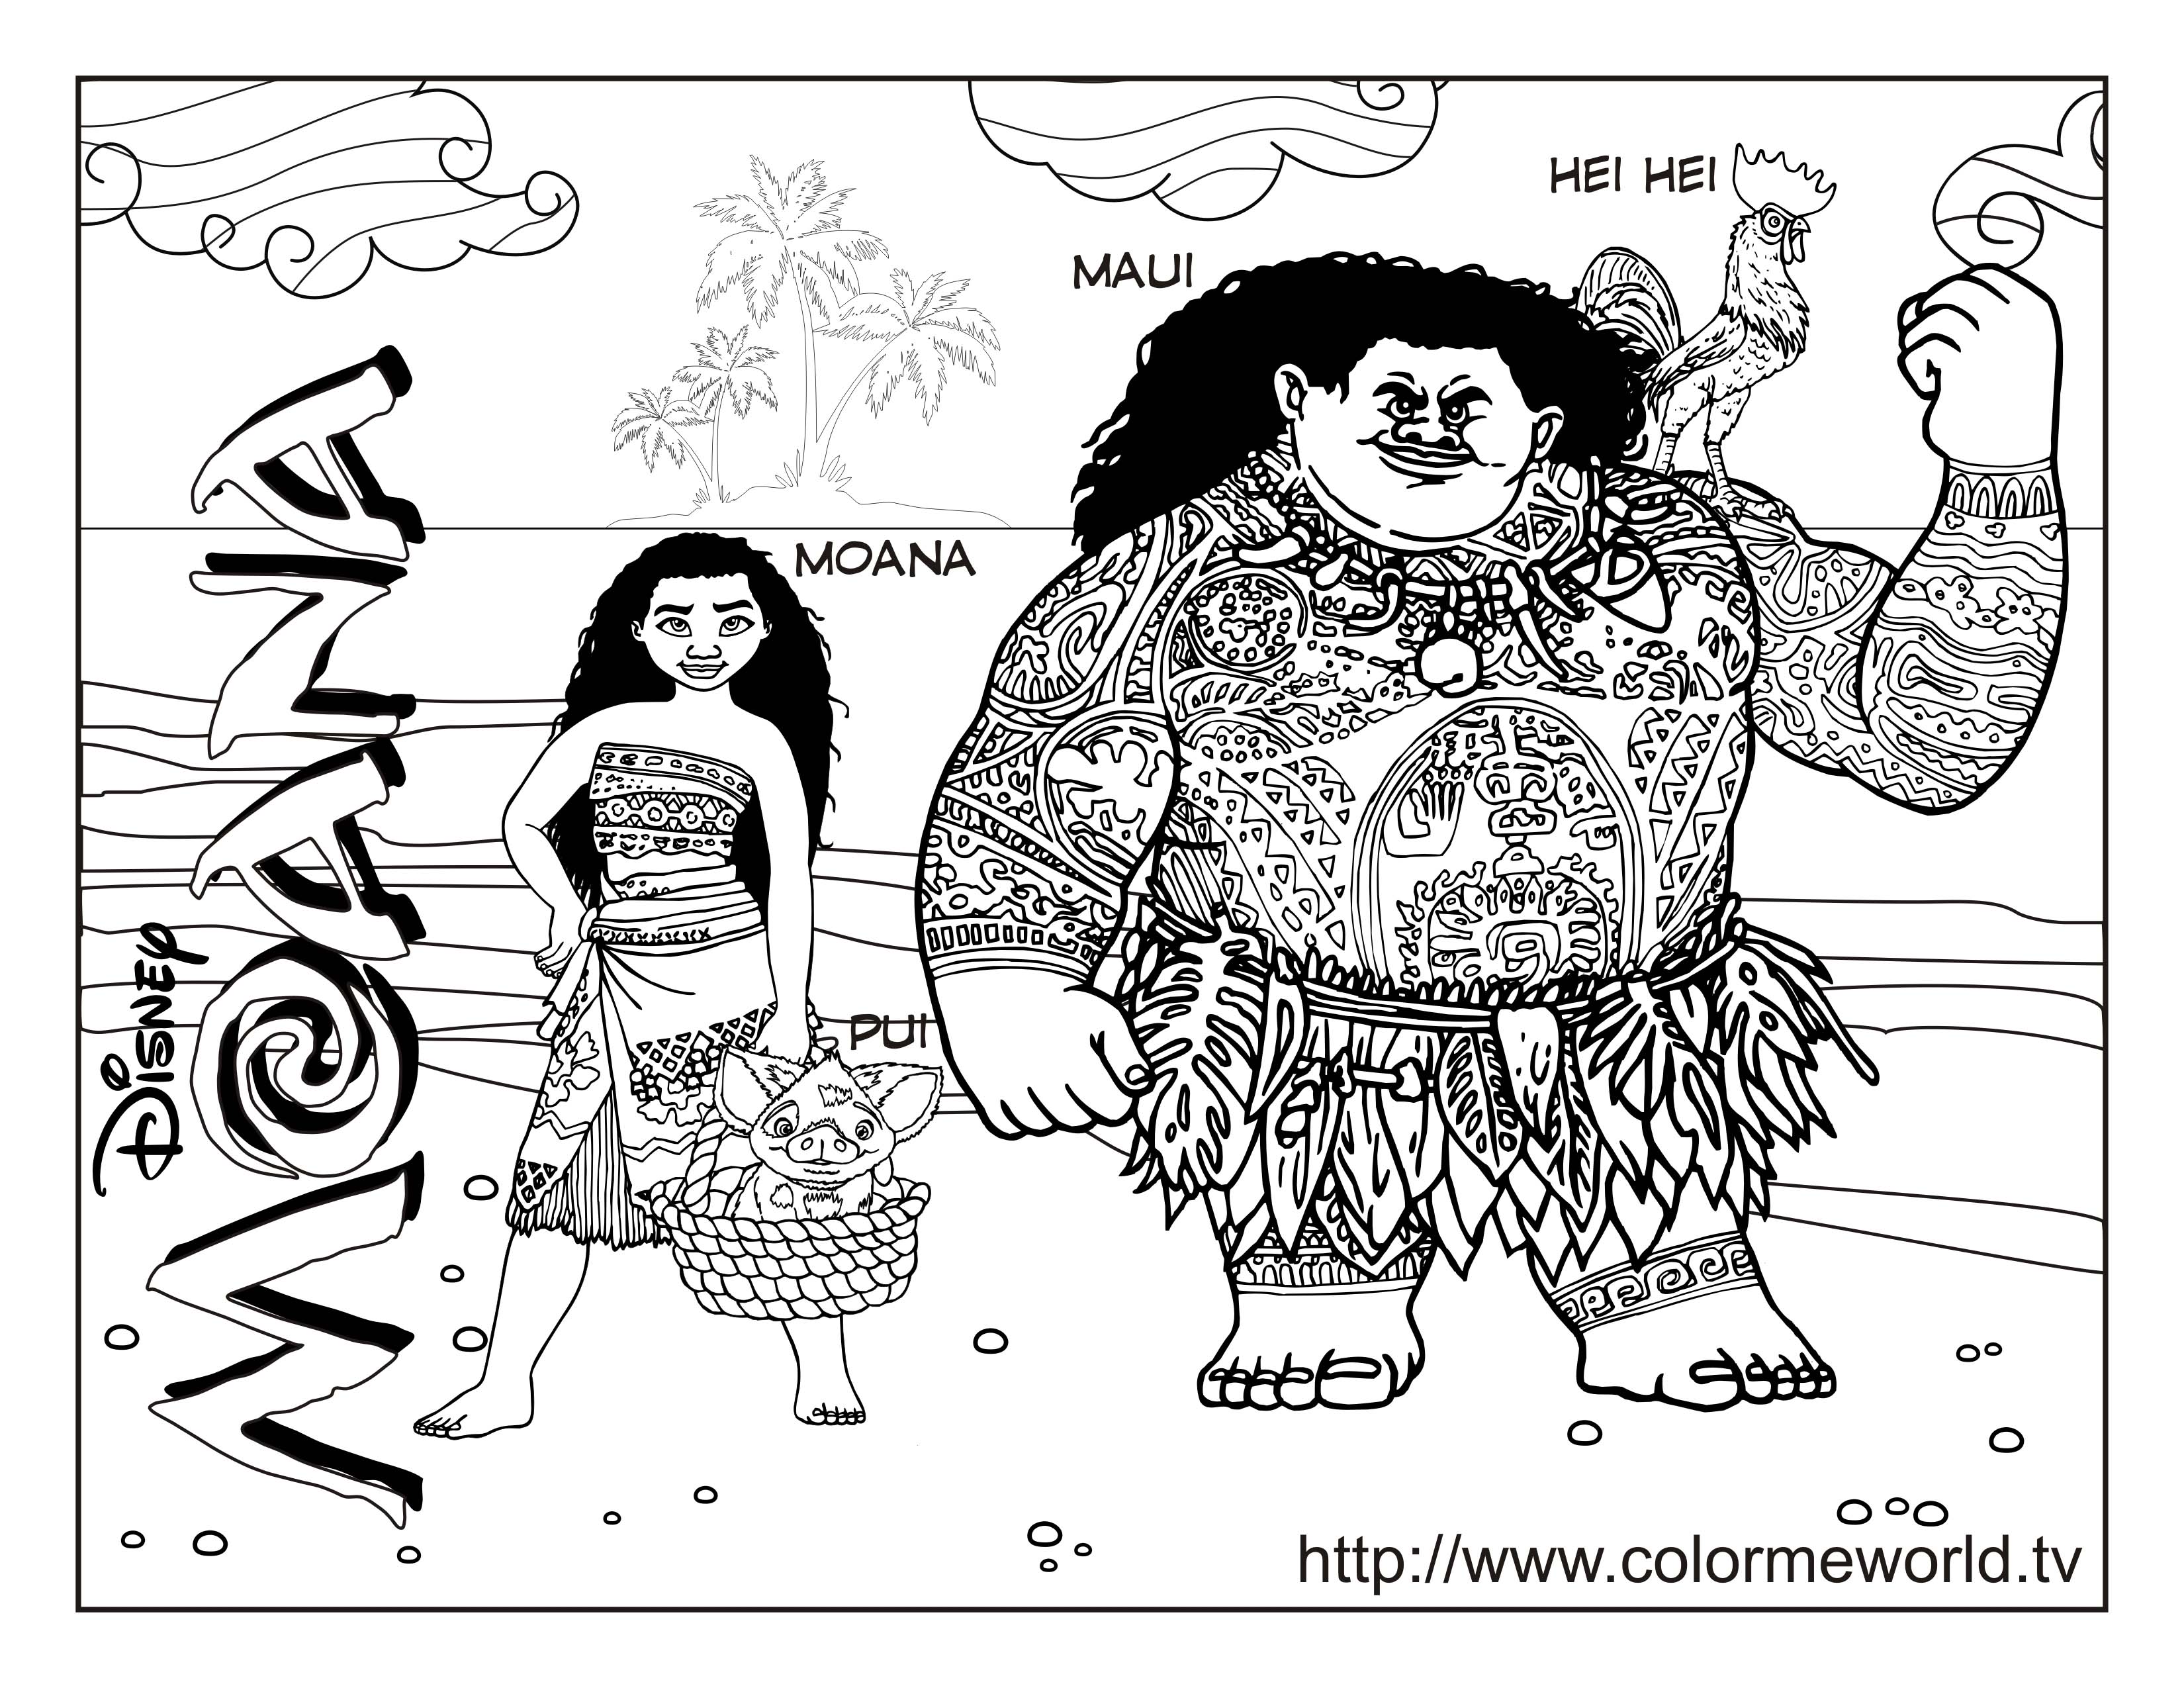 Image of Vaiana to download and color - Moana Kids Coloring Pages